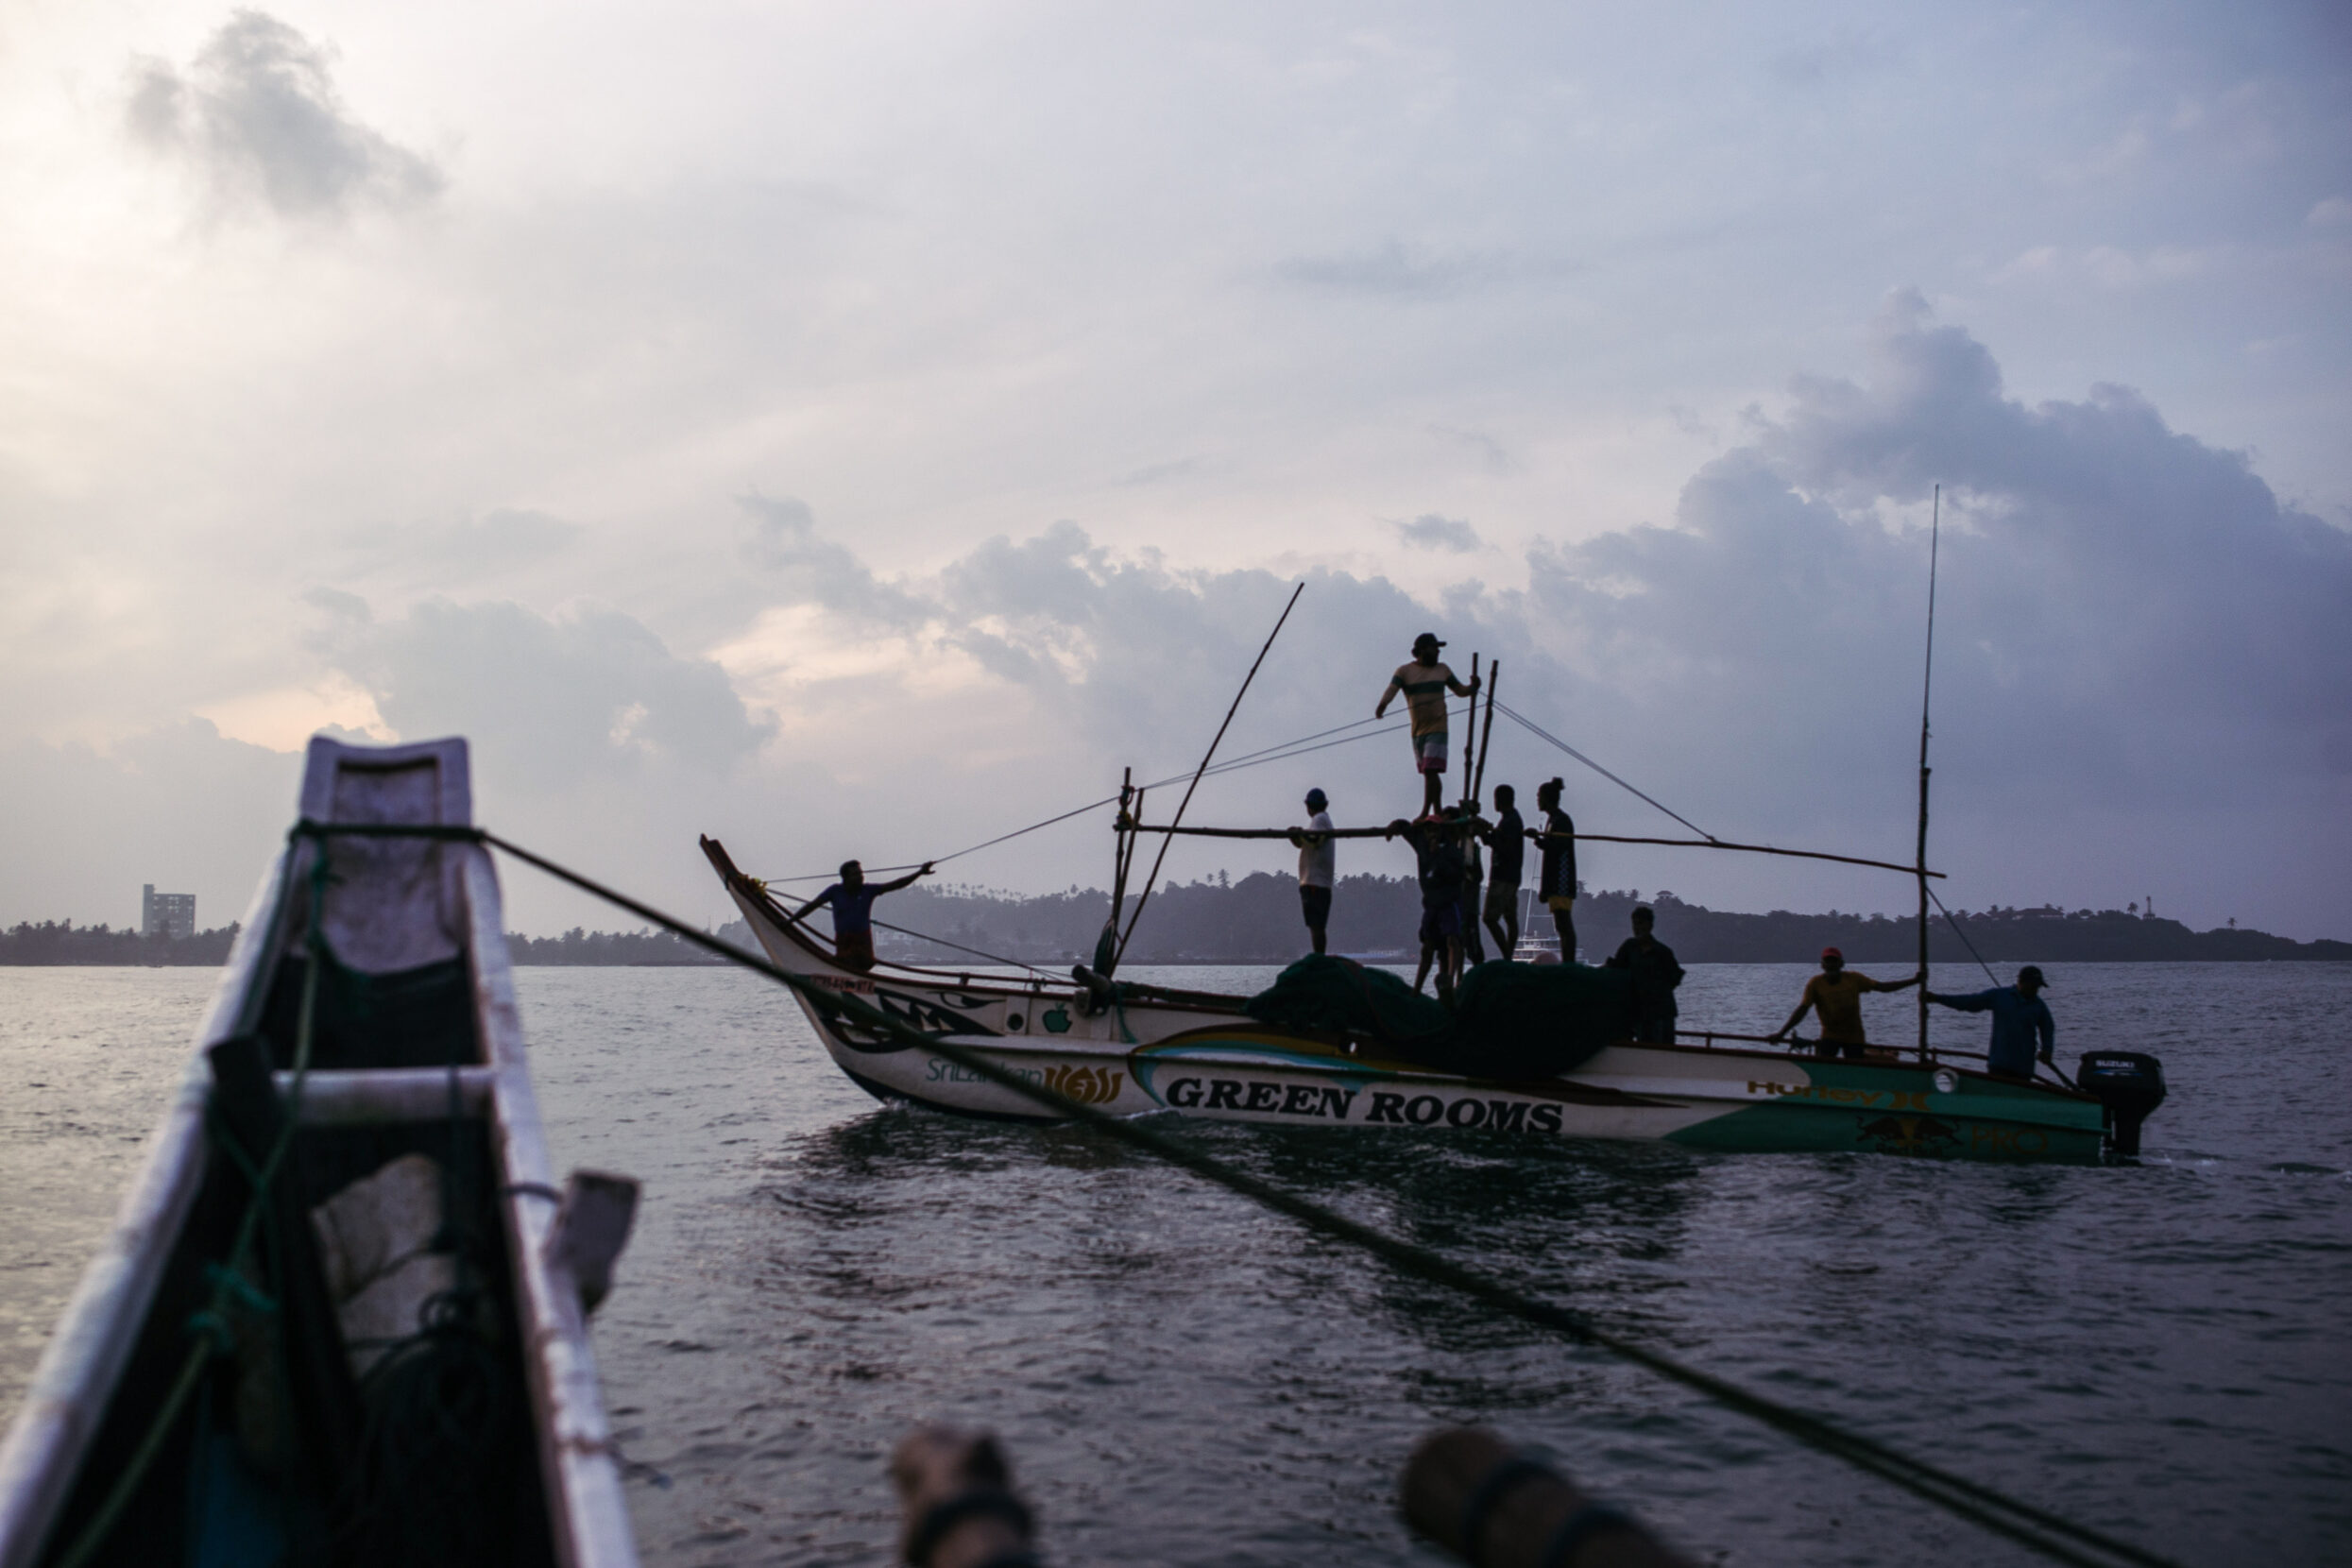 A boat with silhouetted fishermen balancing on poles appears before the bow of another boat.